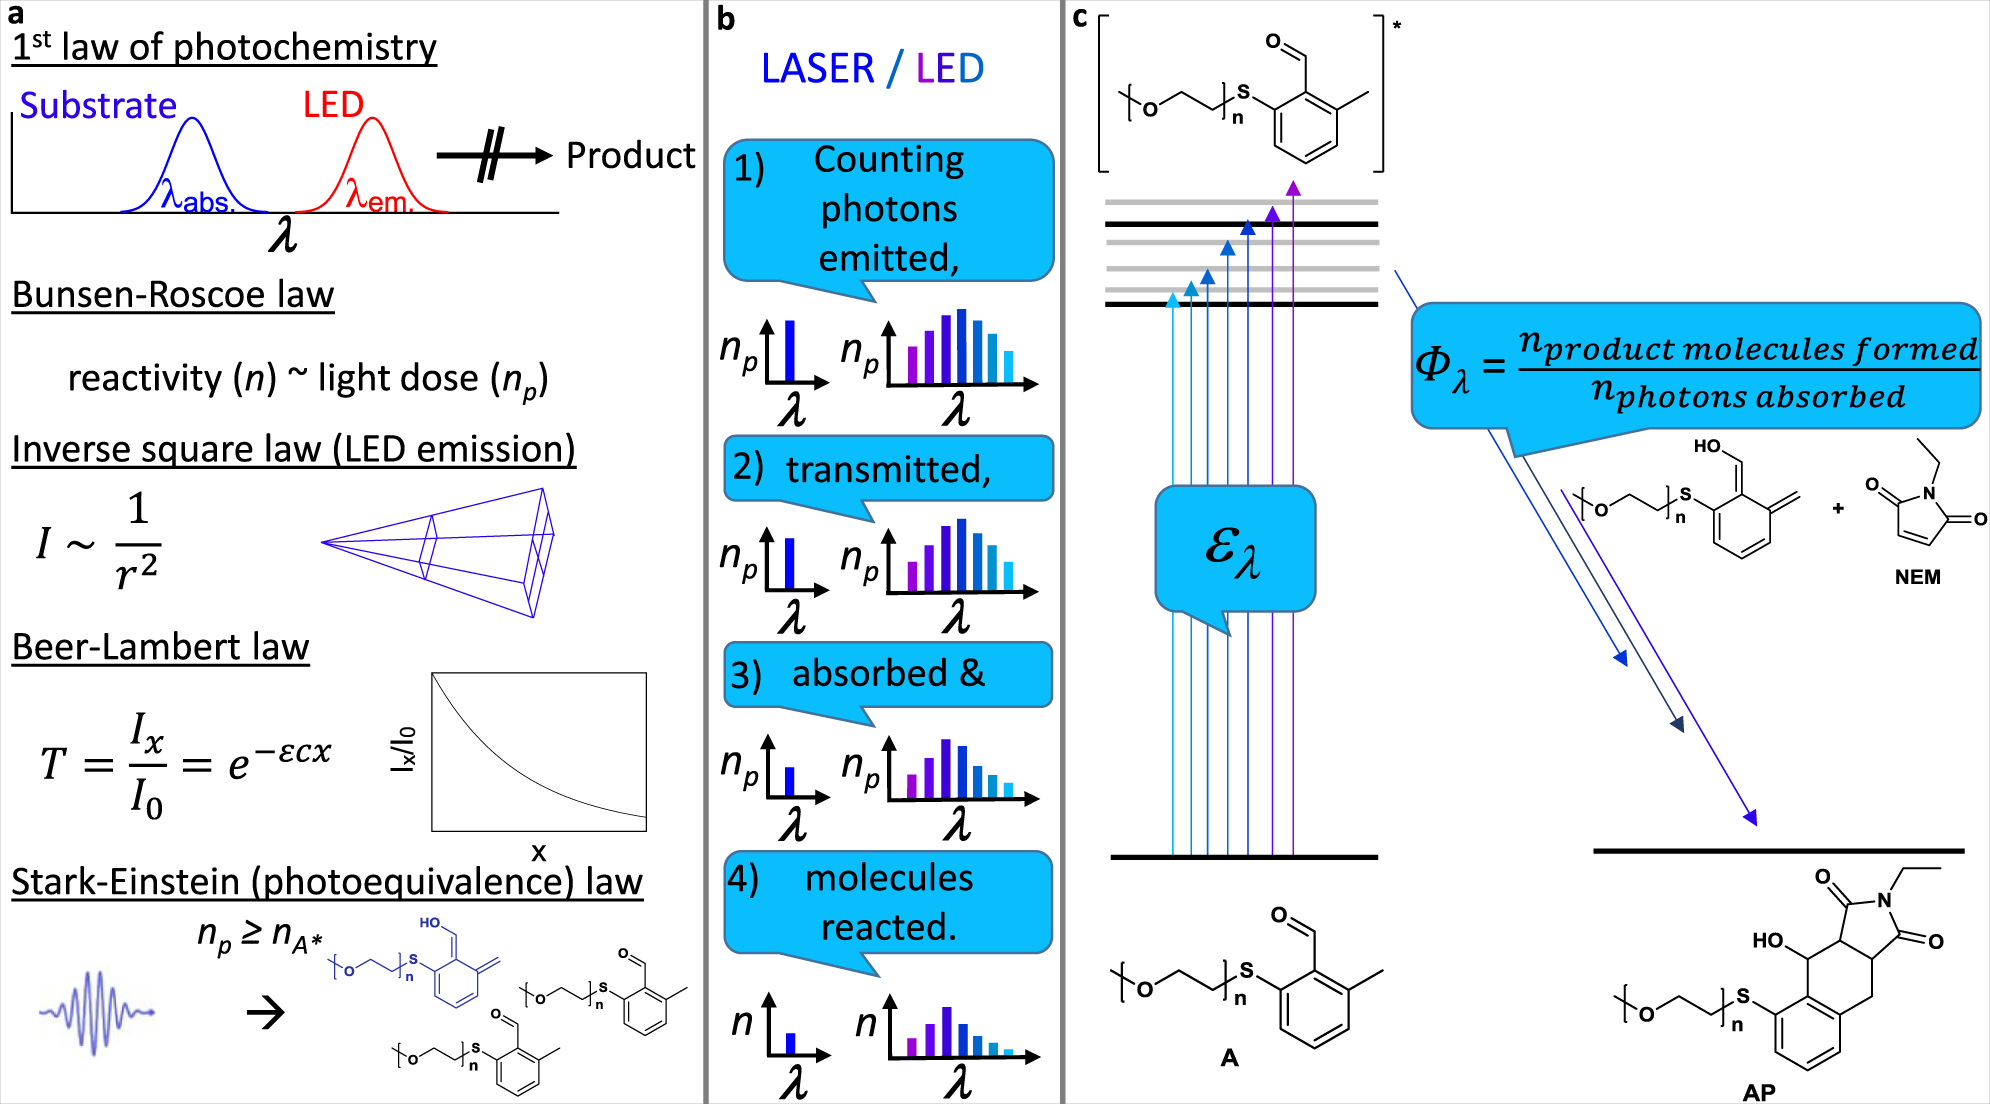 Predicting wavelength-dependent photochemical reactivity and selectivity |  Nature Communications